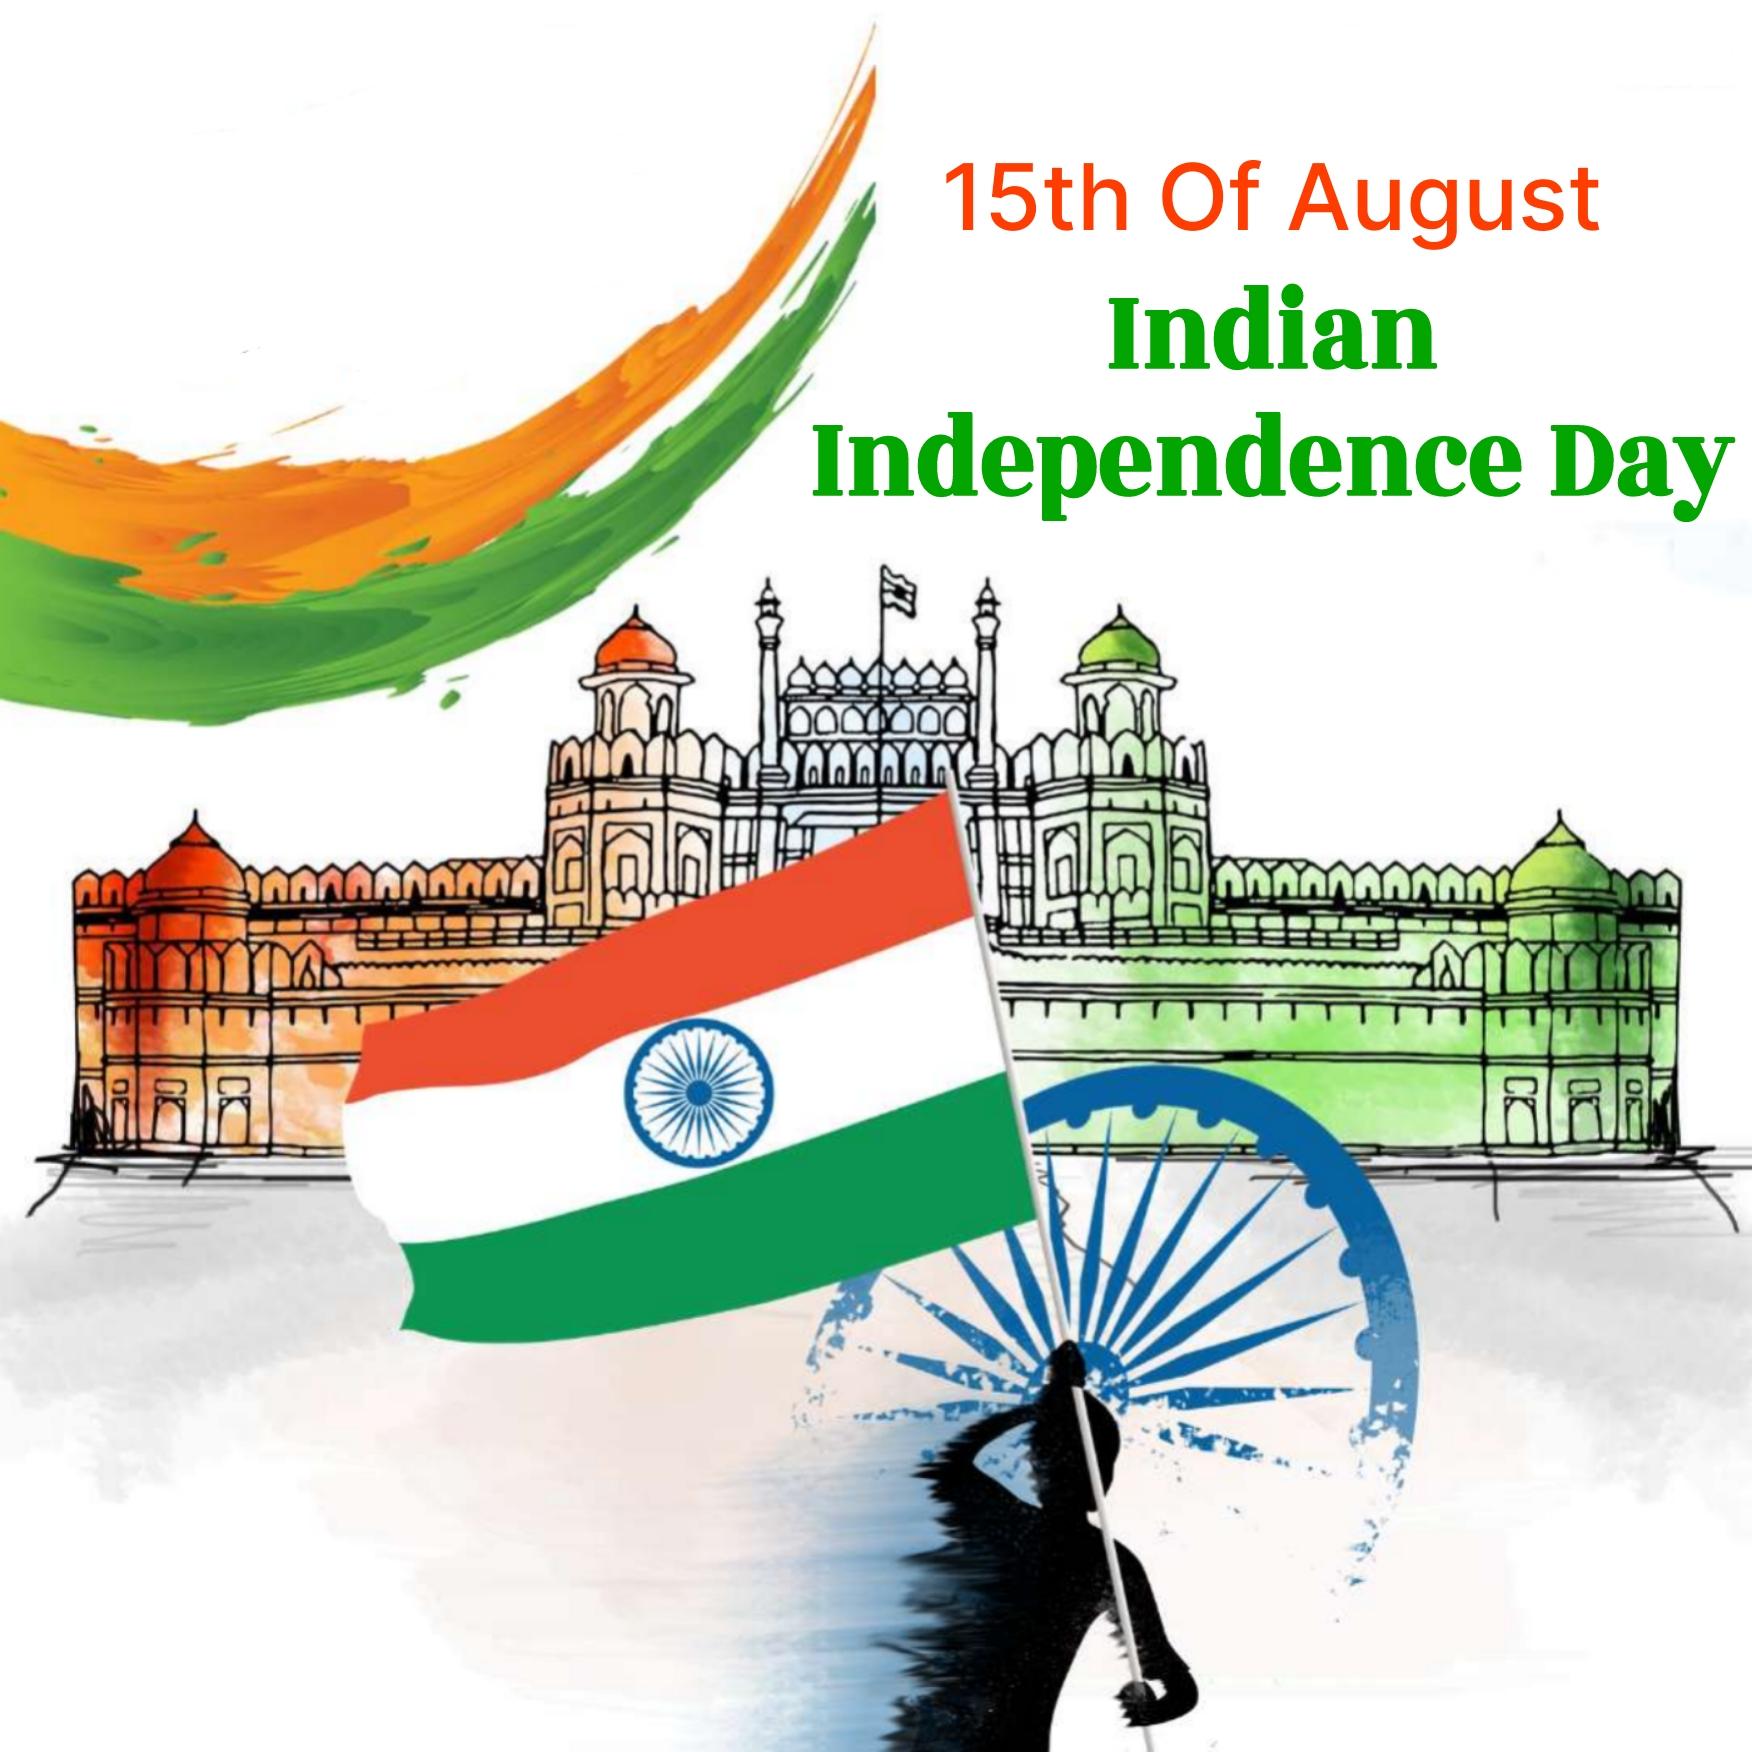 Beautiful Happy Independence Day Images